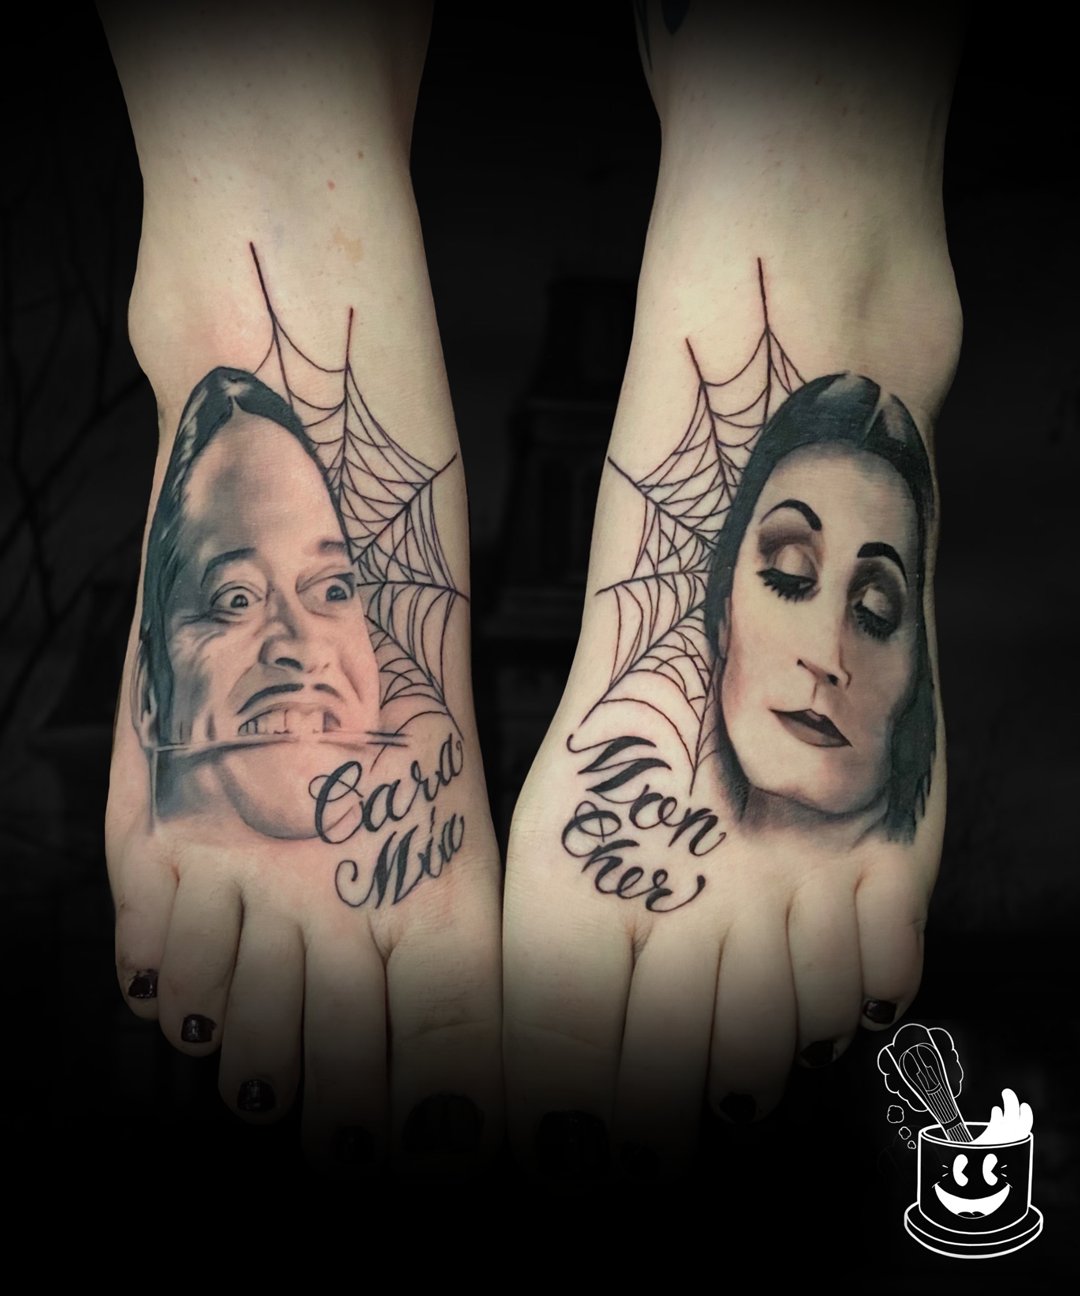 Morticia  Gomez Addams done by Dale at Underworld Tattoo in Salem NH  still have to finish up the frame  Tattoos Best sleeve tattoos Addams  family tattoo